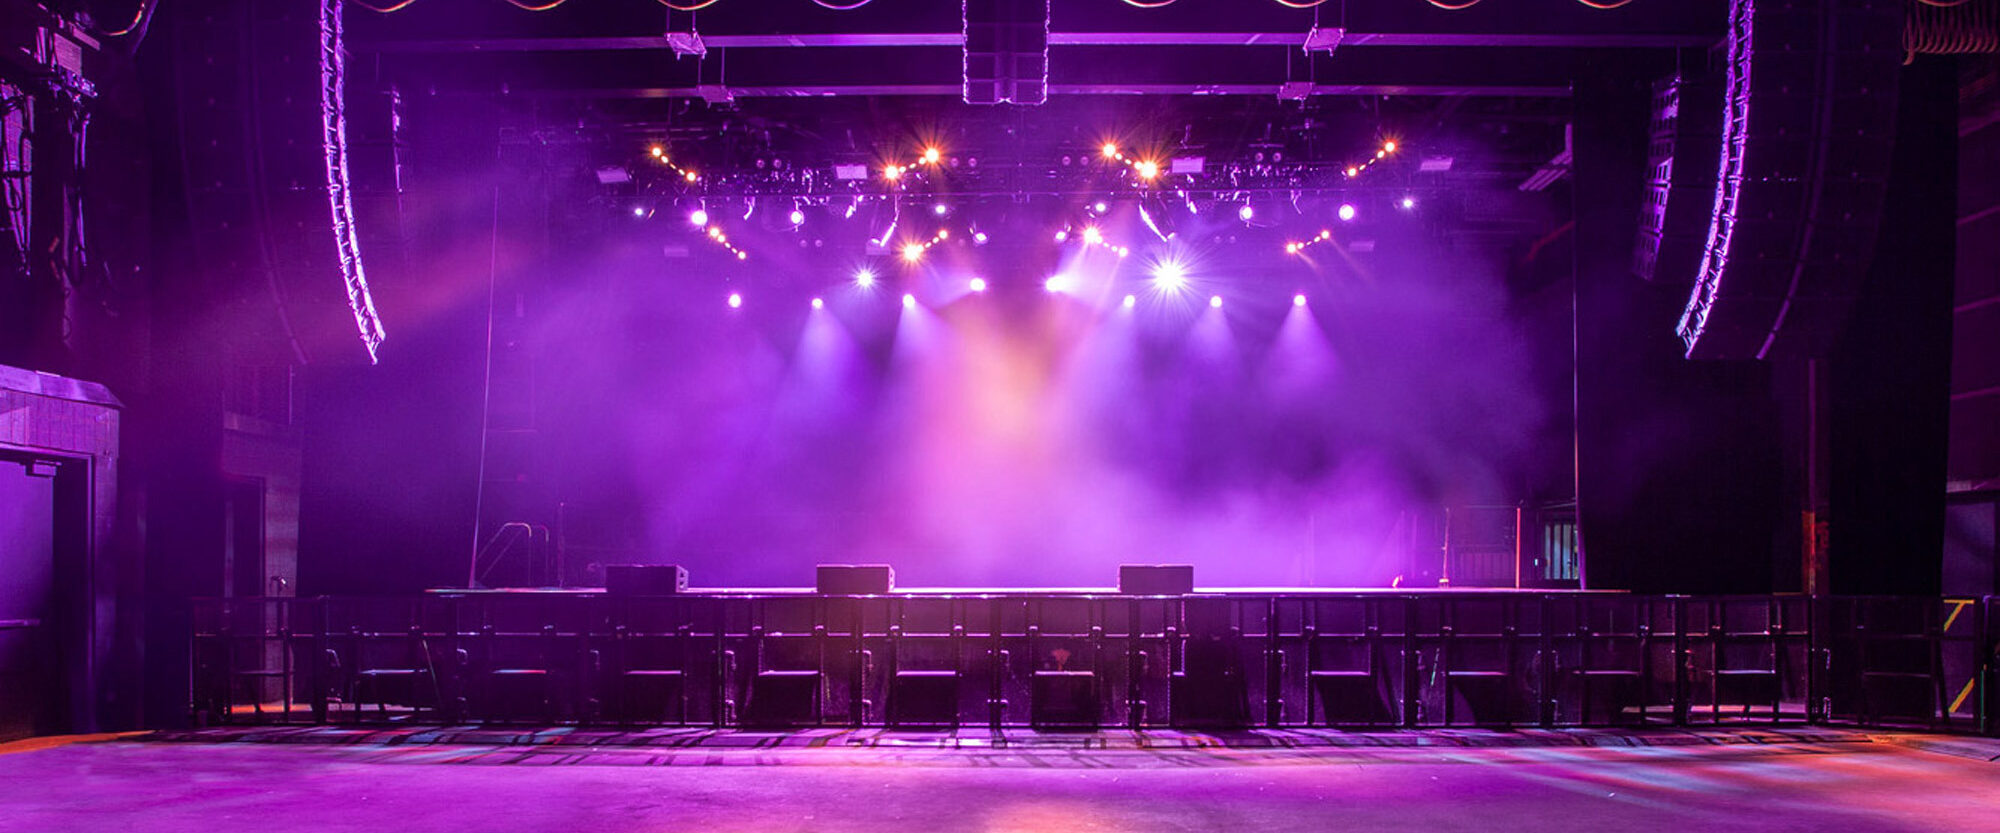 Vibrant stage lighting illuminates an empty concert venue with rows of chairs facing a stage, casting dramatic shadows and showcasing a contemporary design melding performance with aesthetics.